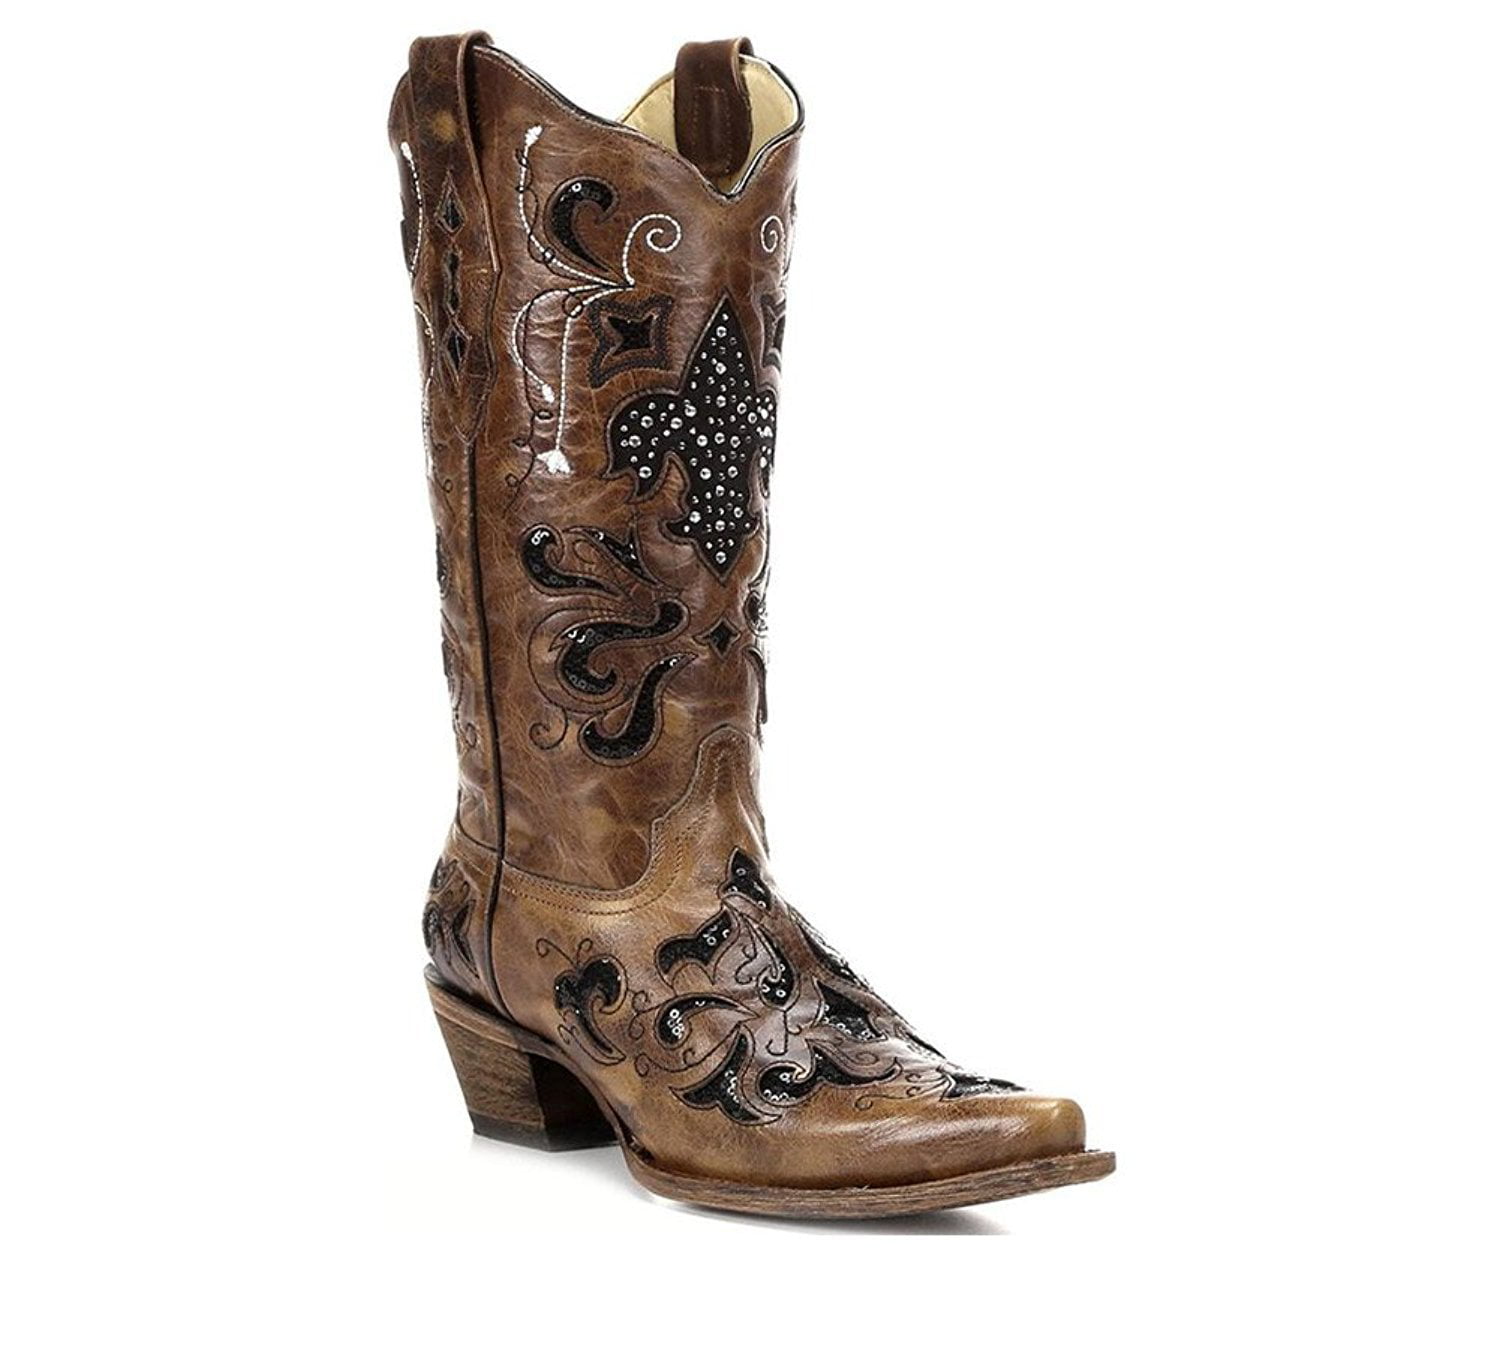 CORRAL Women's Leather Laced and Studded Snip Toe Cowgirl Boots R1217 